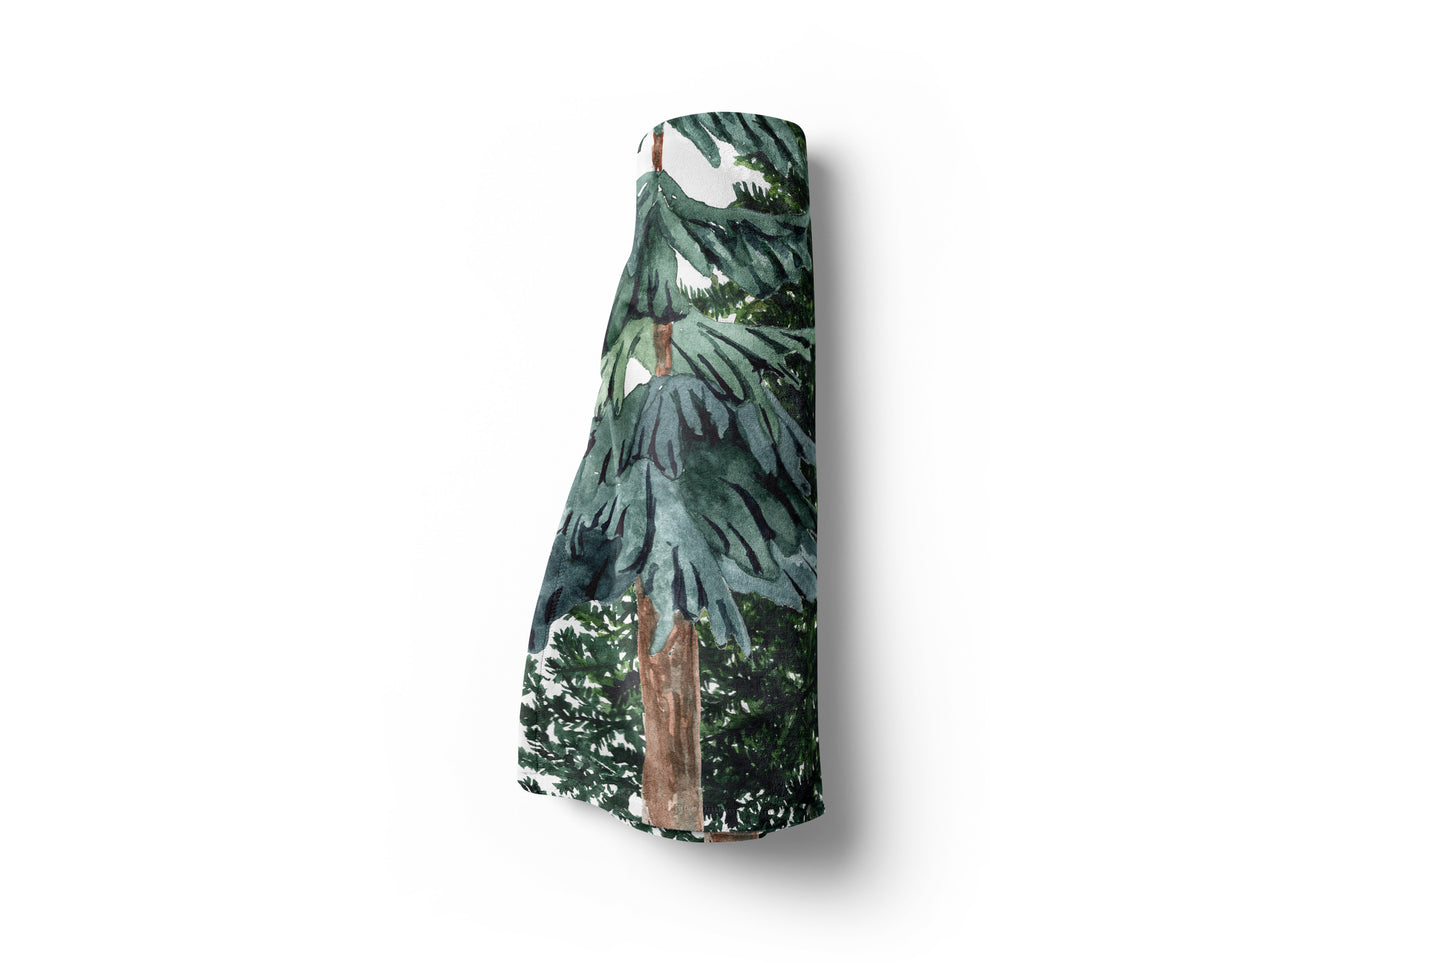 Forest Personalized Minky Blanket, Woodland Nursery Bedding - The Forest